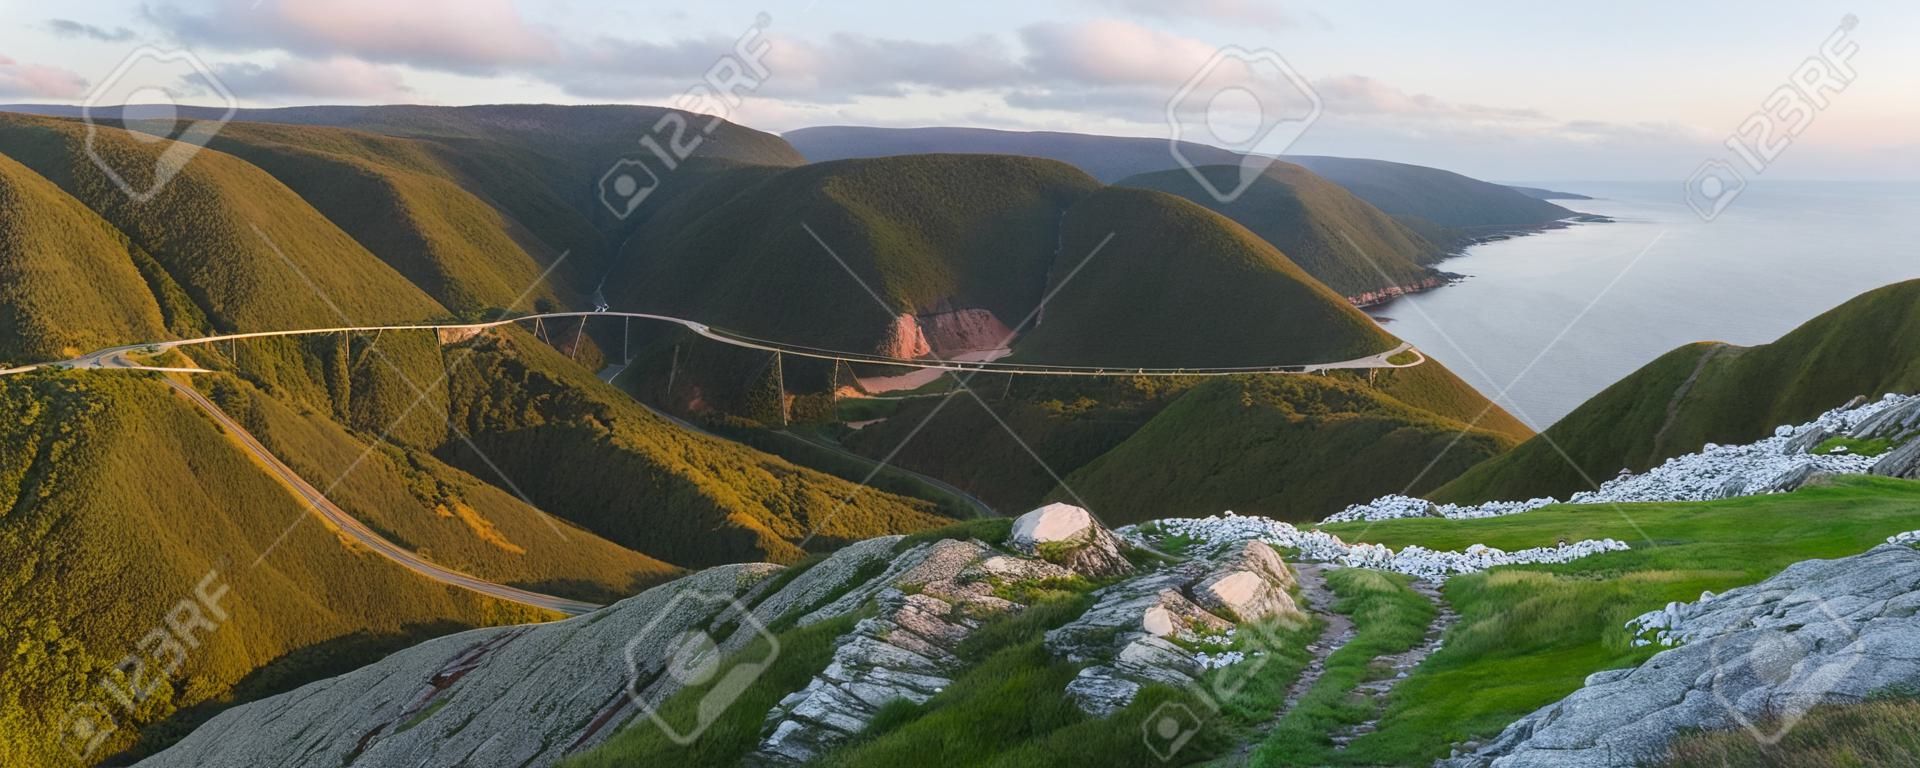 The winding Cabot Trail road seen from high above on the Skyline Trail at sunset in Cape Breton Highlands National Park, Nova Scotia